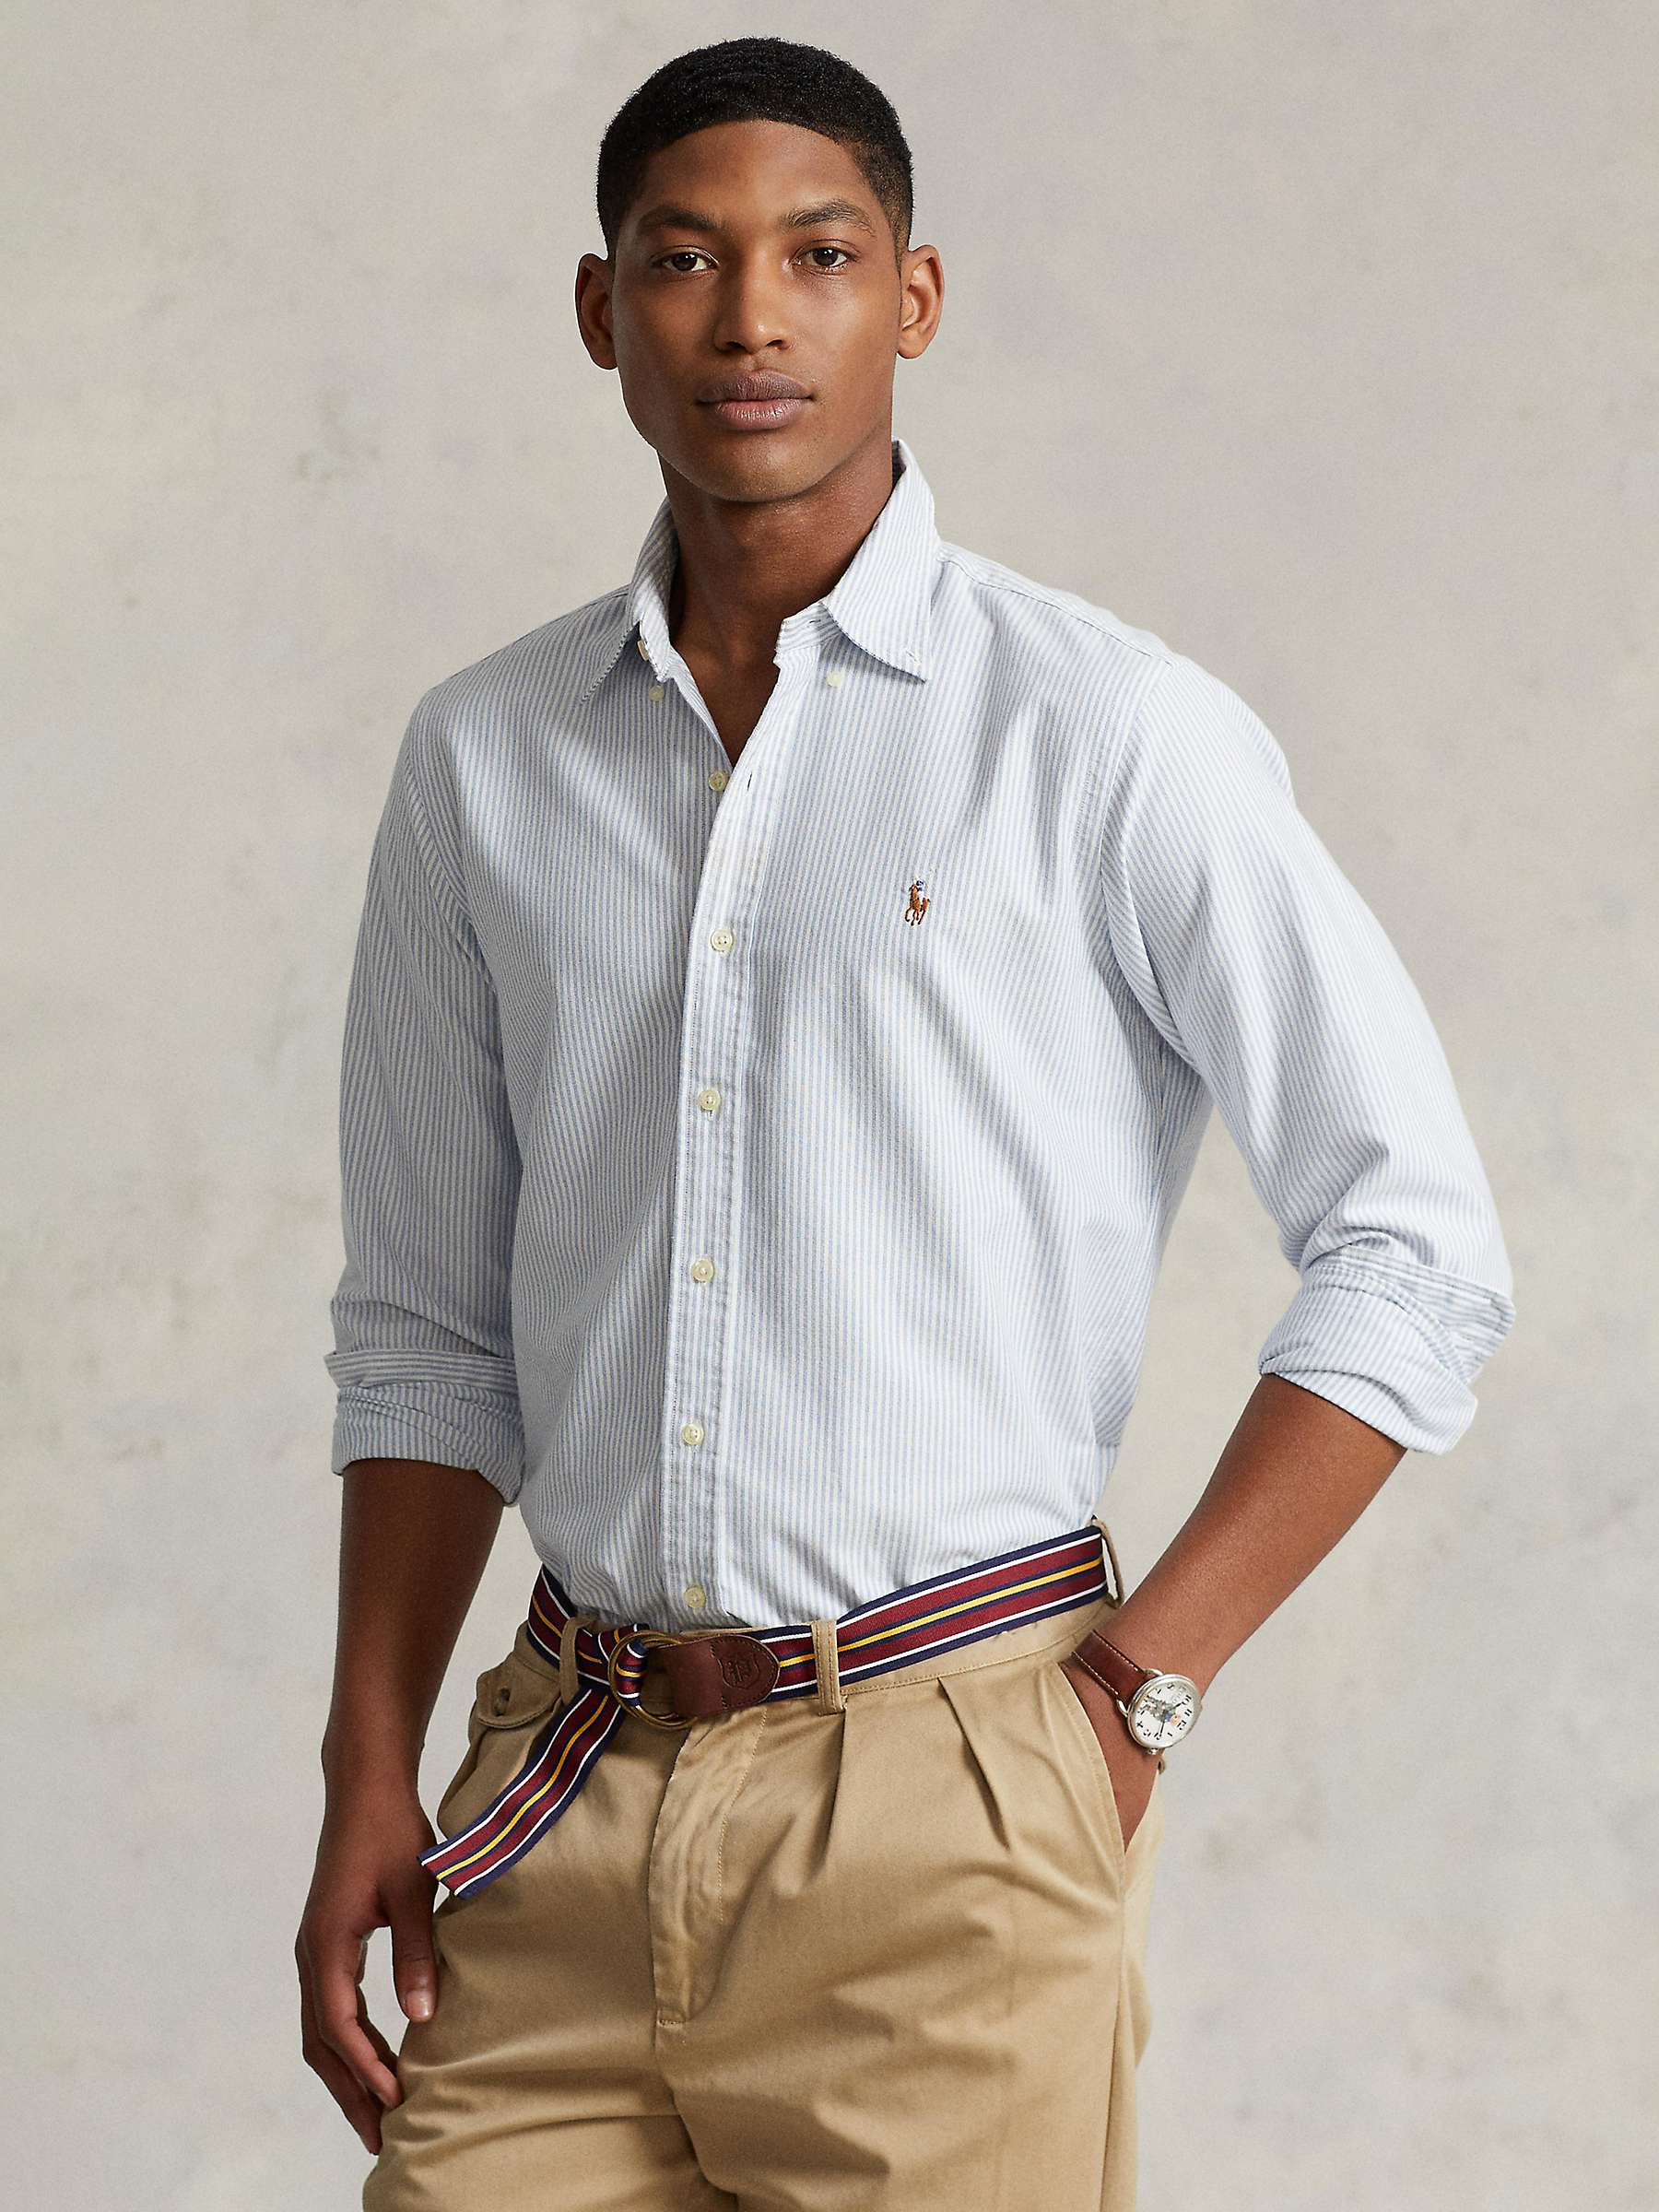 Buy Polo Ralph Lauren Slim Fit Striped Oxford Shirt, Blue/White Online at johnlewis.com